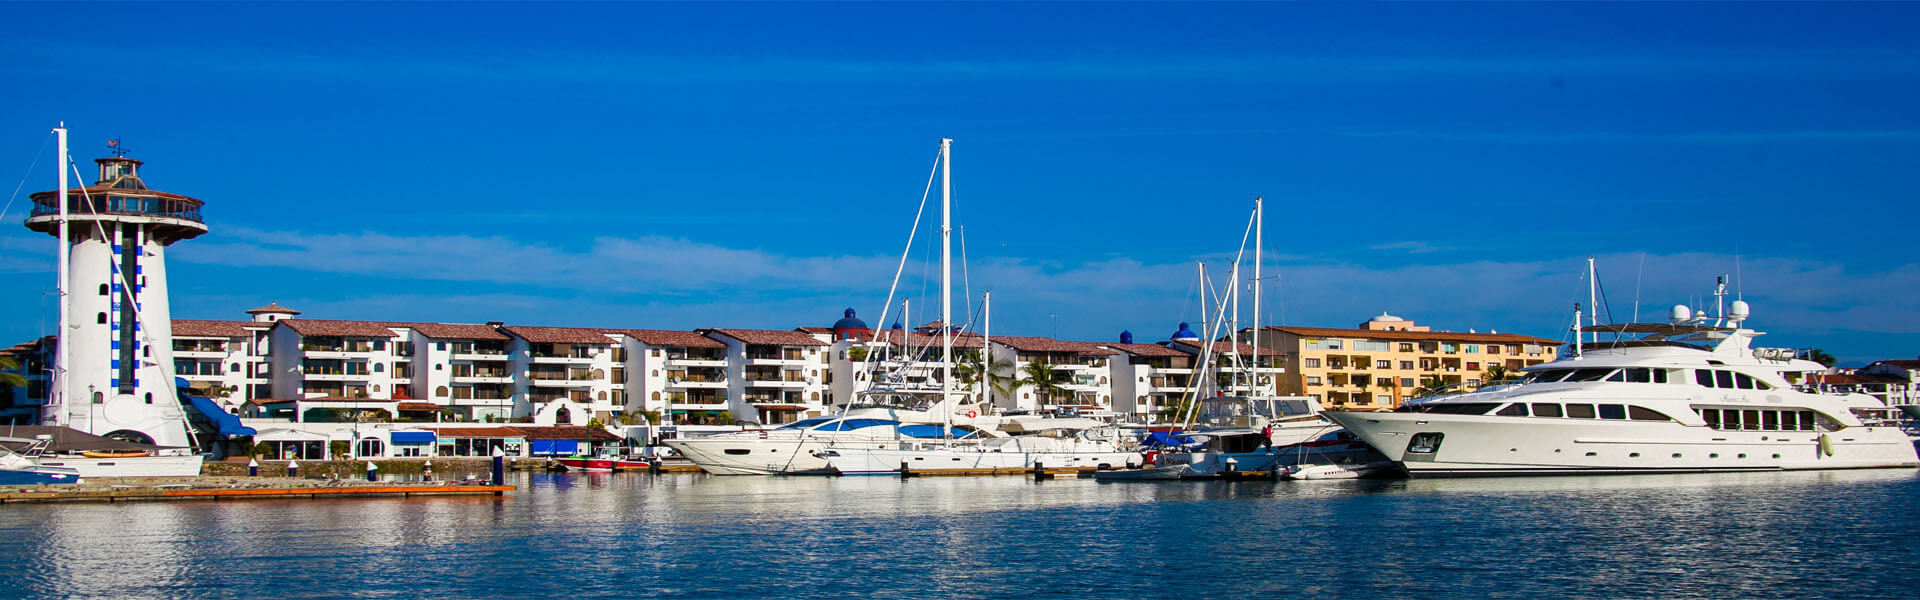 Picture of a beautiful harbor in Puerto Vallarta, Mexico.  The picture features blue water and white boats against a blue sky.